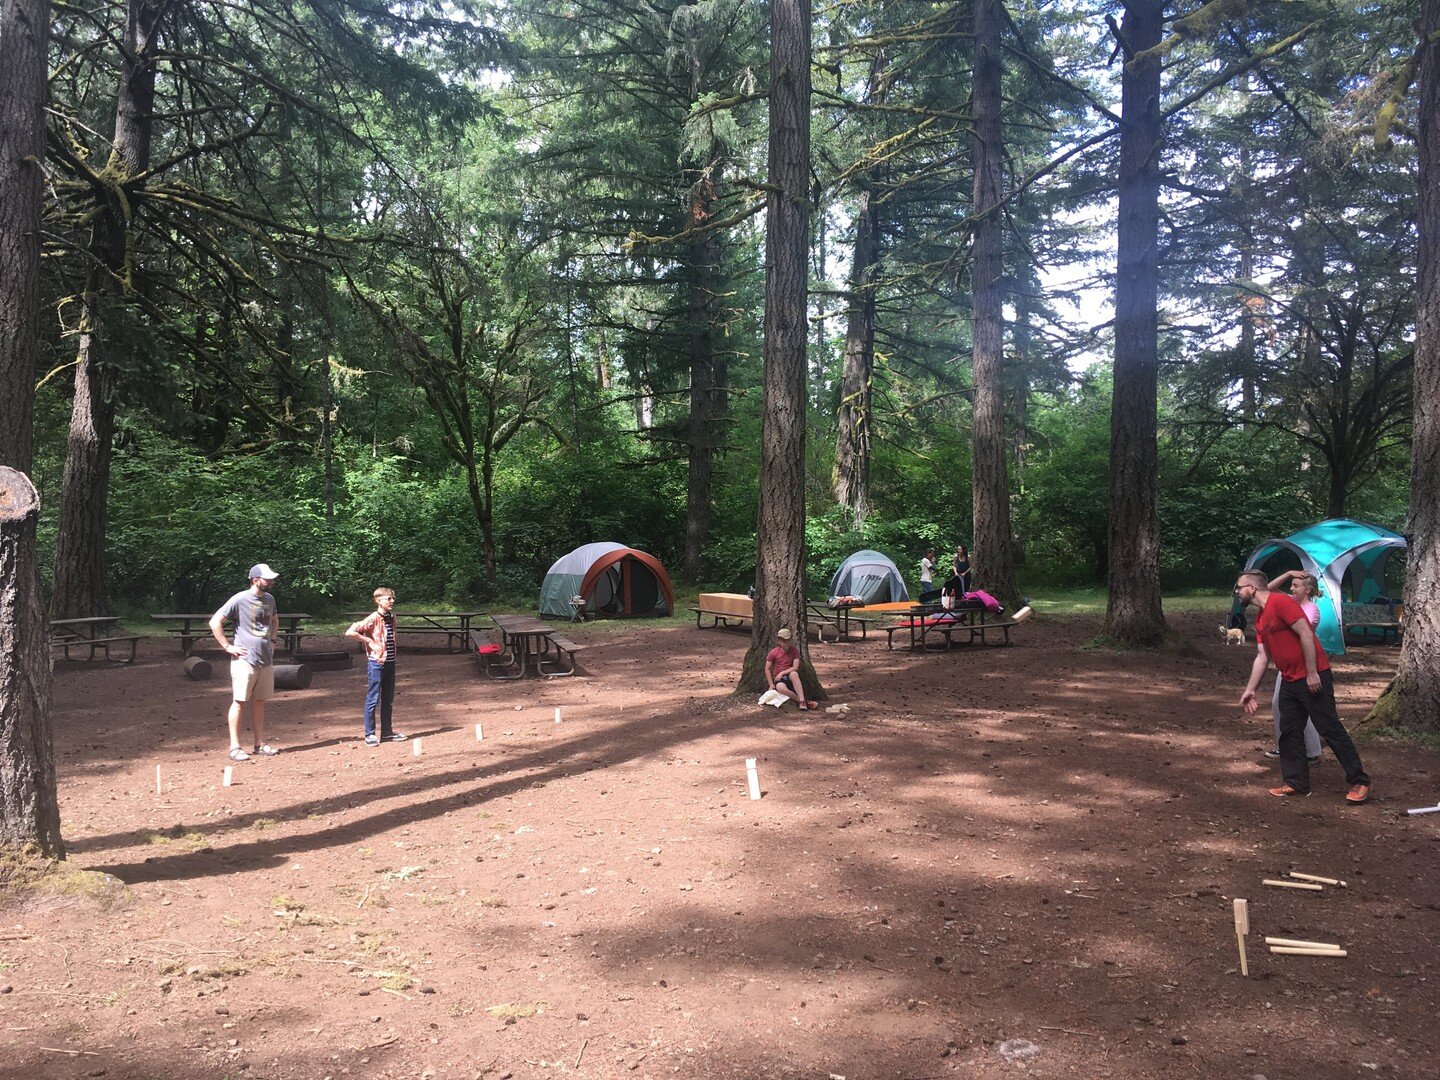 School campout kubb games, 2018 and 2023. Underrated backyard game that we only get to play in parks due to small backyard. :P